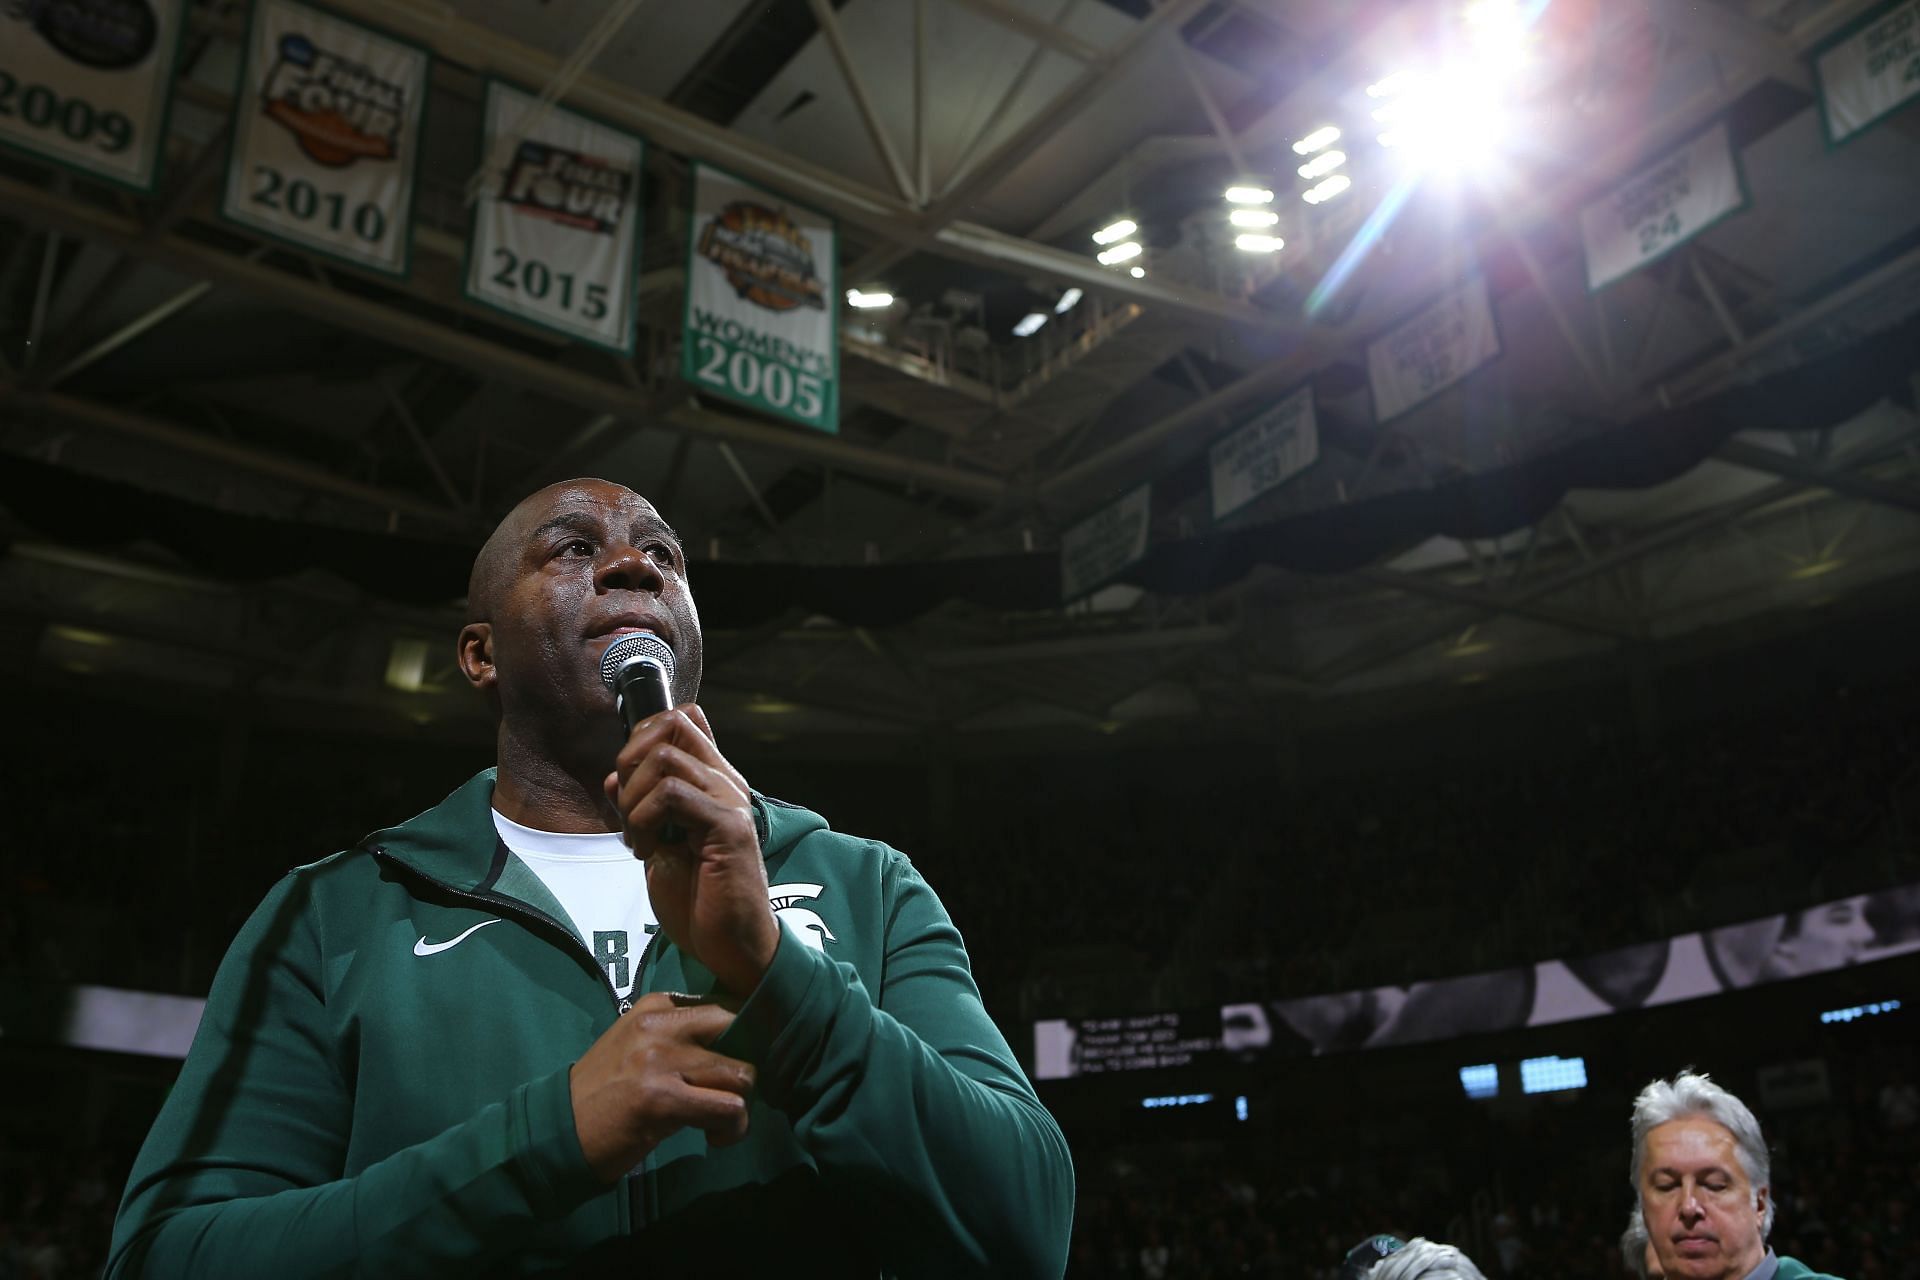 NBA legend and former Michigan State star Earvin &quot;Magic&quot; Johnson speaks to the crowd during halftime of the game between the Michigan State Spartans and the Minnesota Golden Gophers at Breslin Center on February 9, 2019 in East Lansing, Michigan.